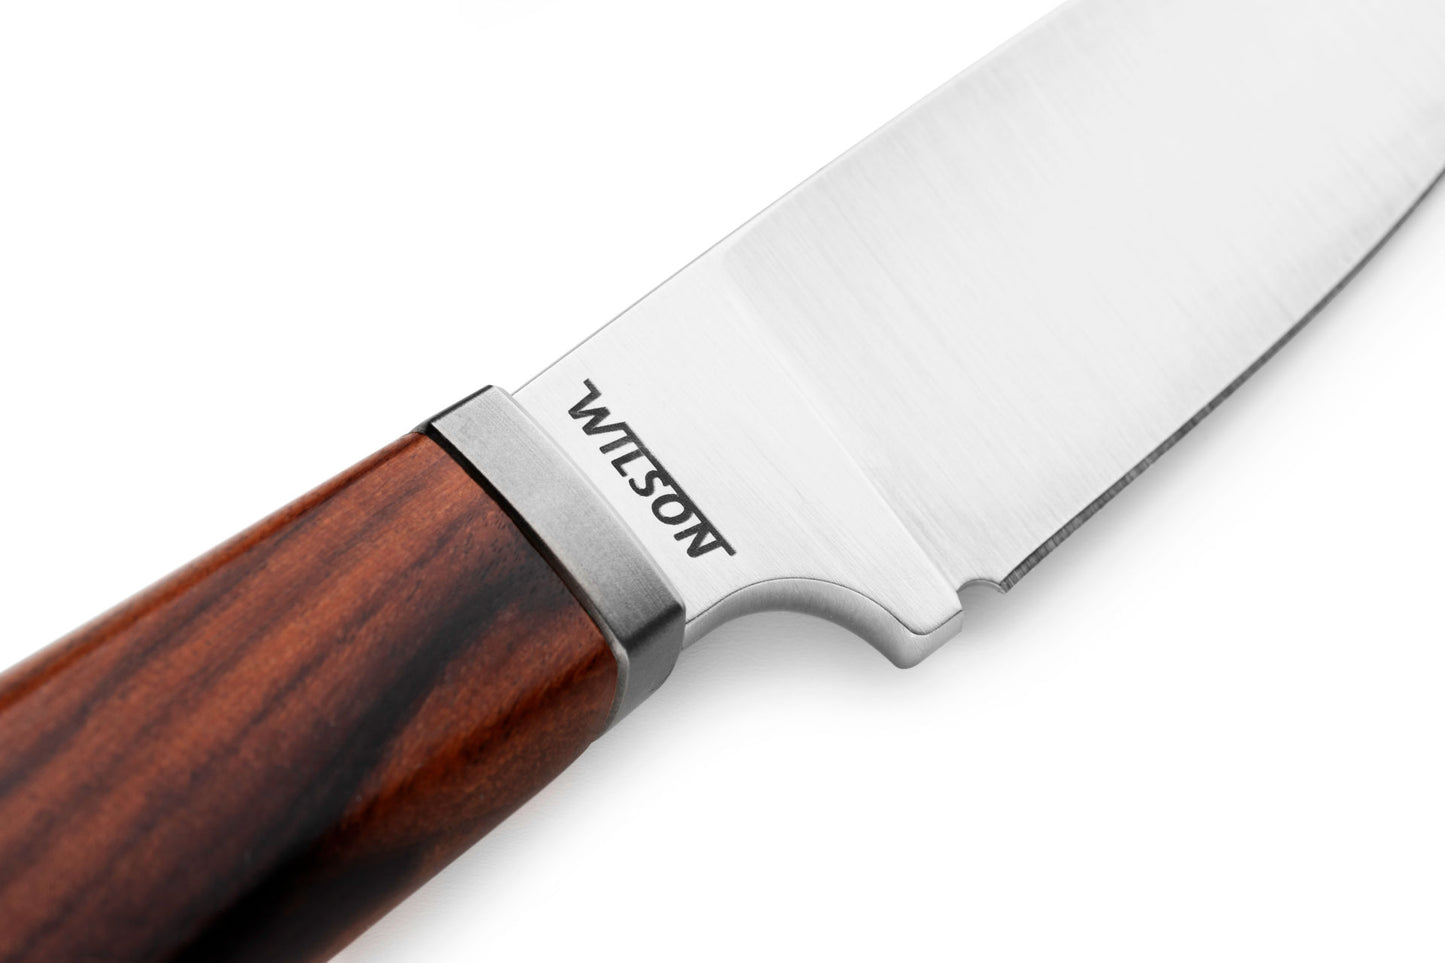 LionSteel Willy 2.56" M390 Santos Wood Fixed Blade Knife with Leather Sheath WL1 ST